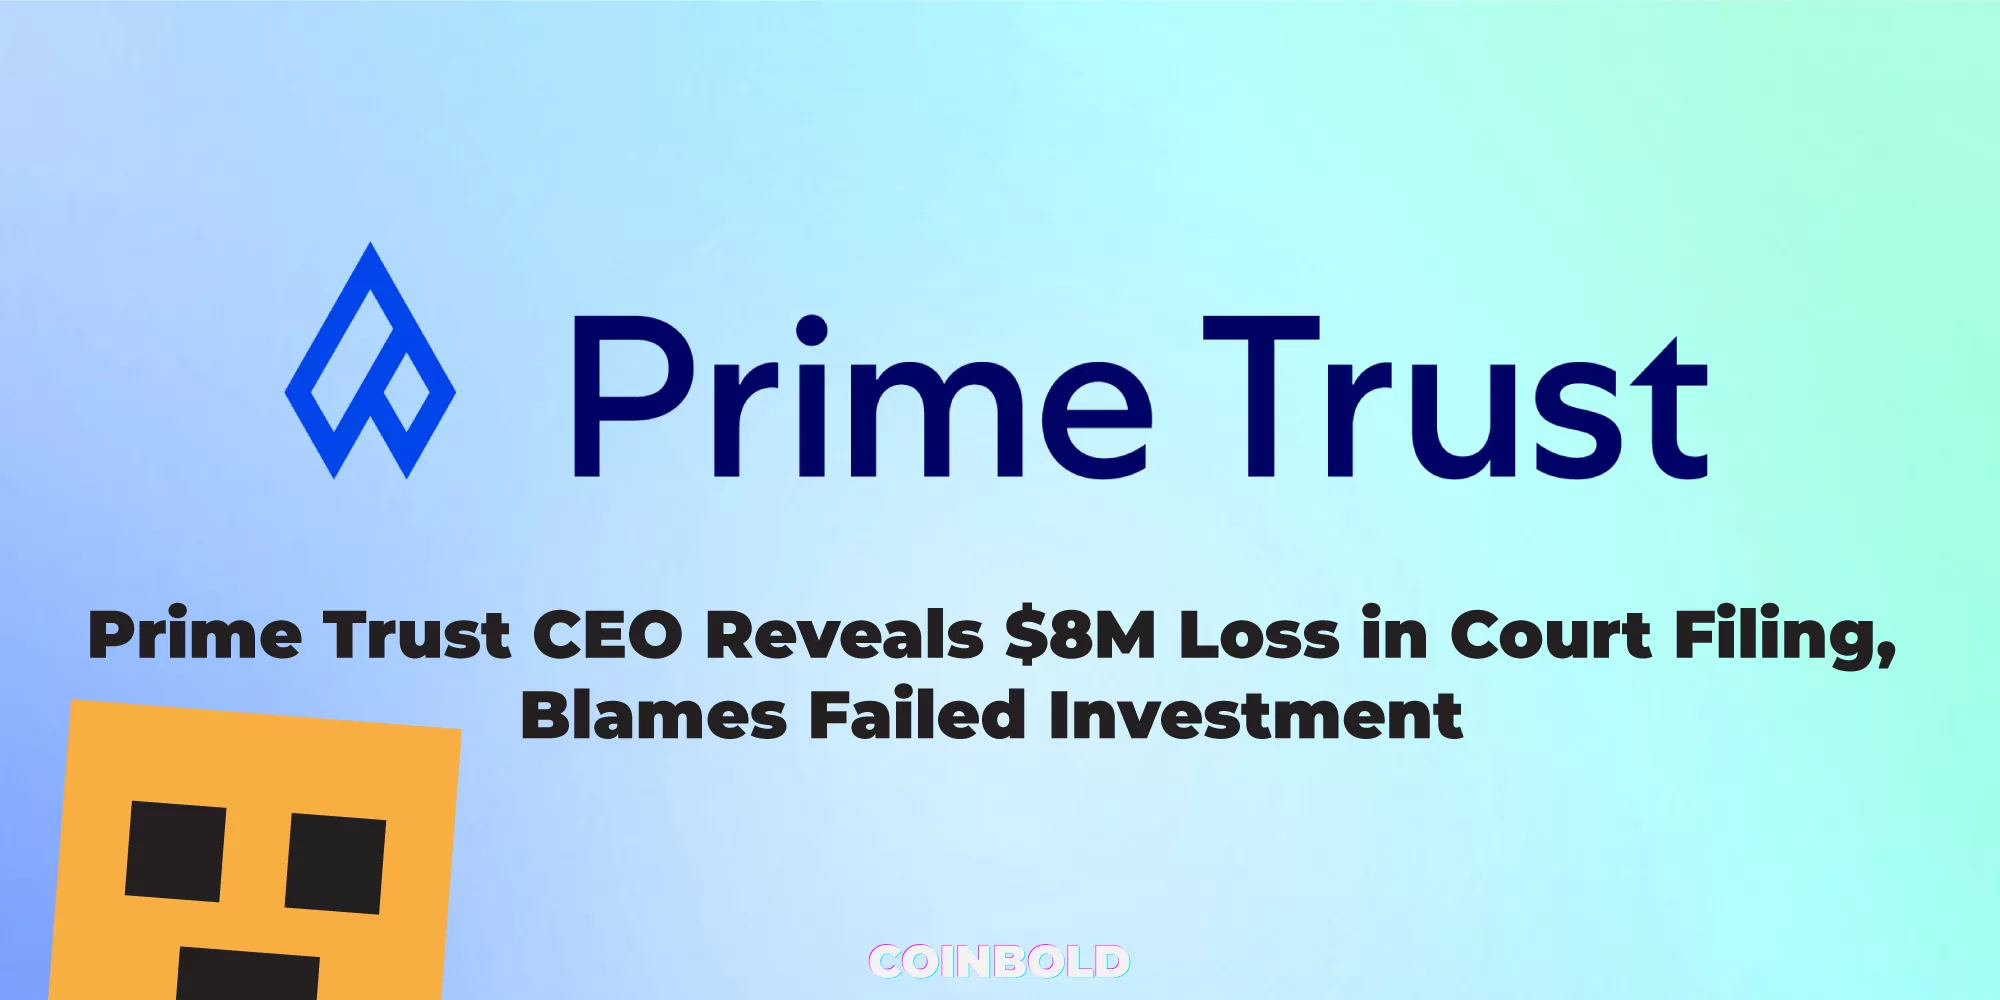 Prime Trust CEO Reveals $8M Loss in Court Filing, Blames Failed Investment